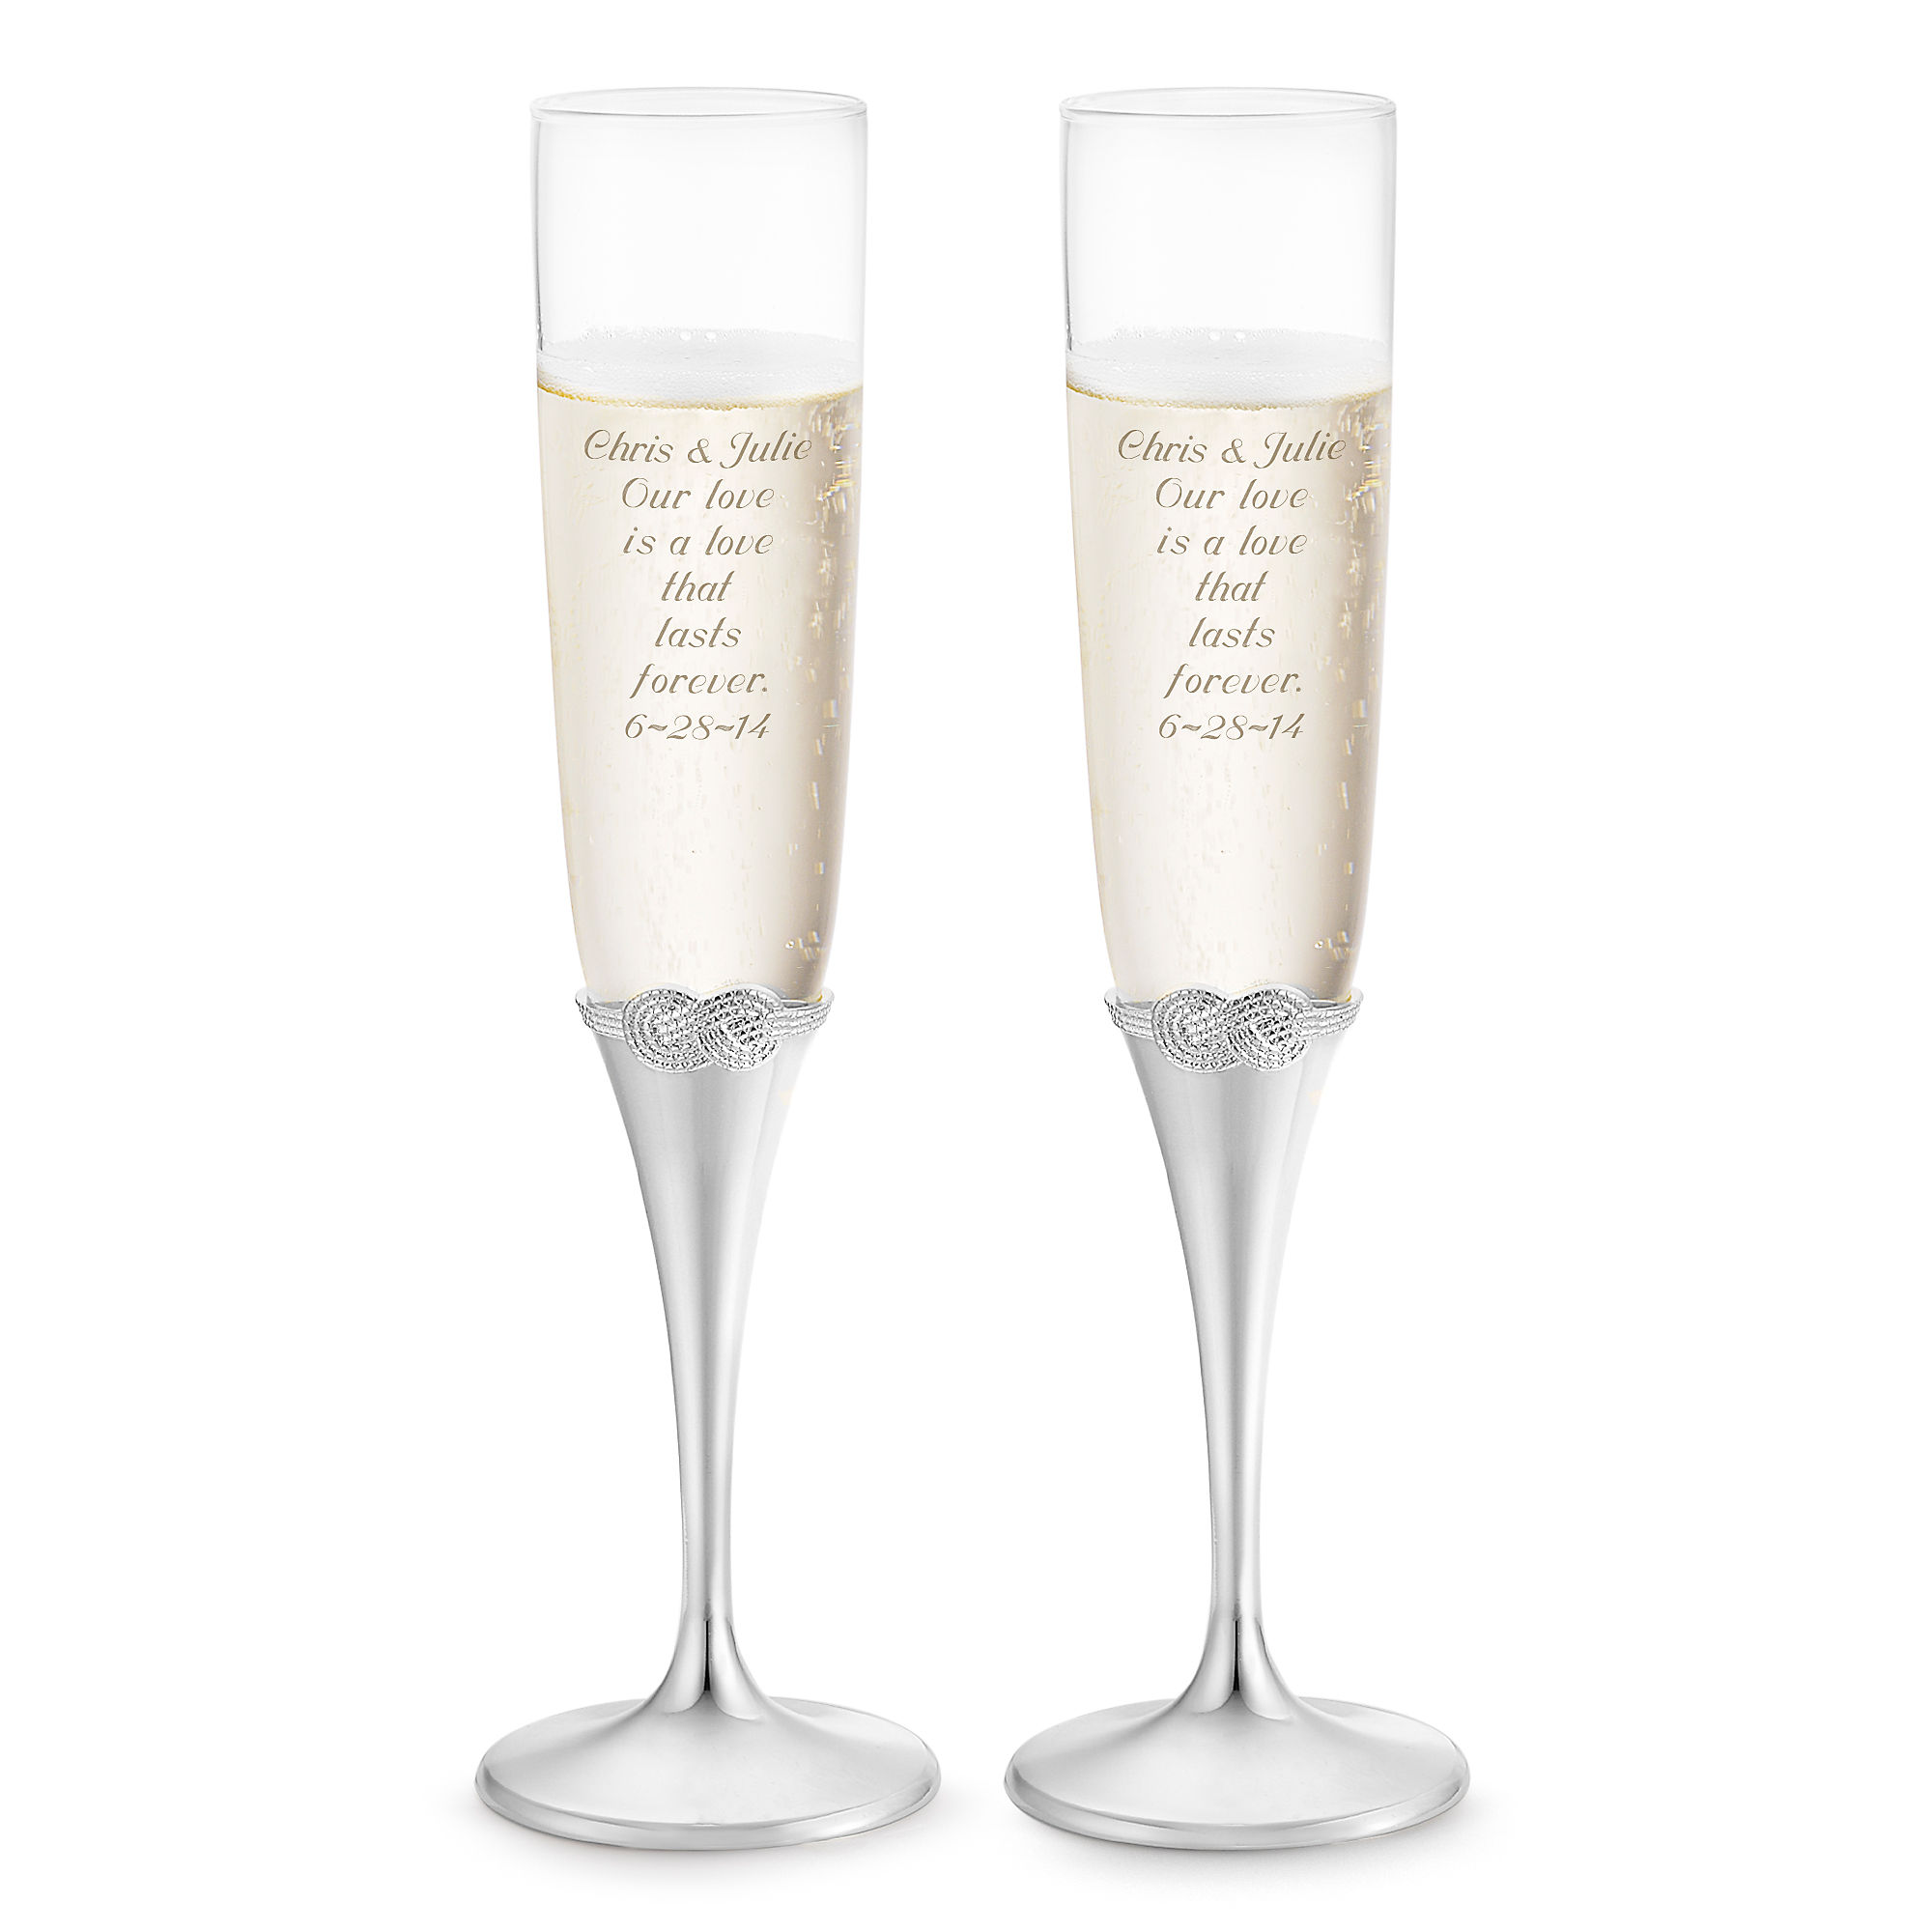 14 Personalized toasting glasses/ flutes/ ENGRAVED FREE 